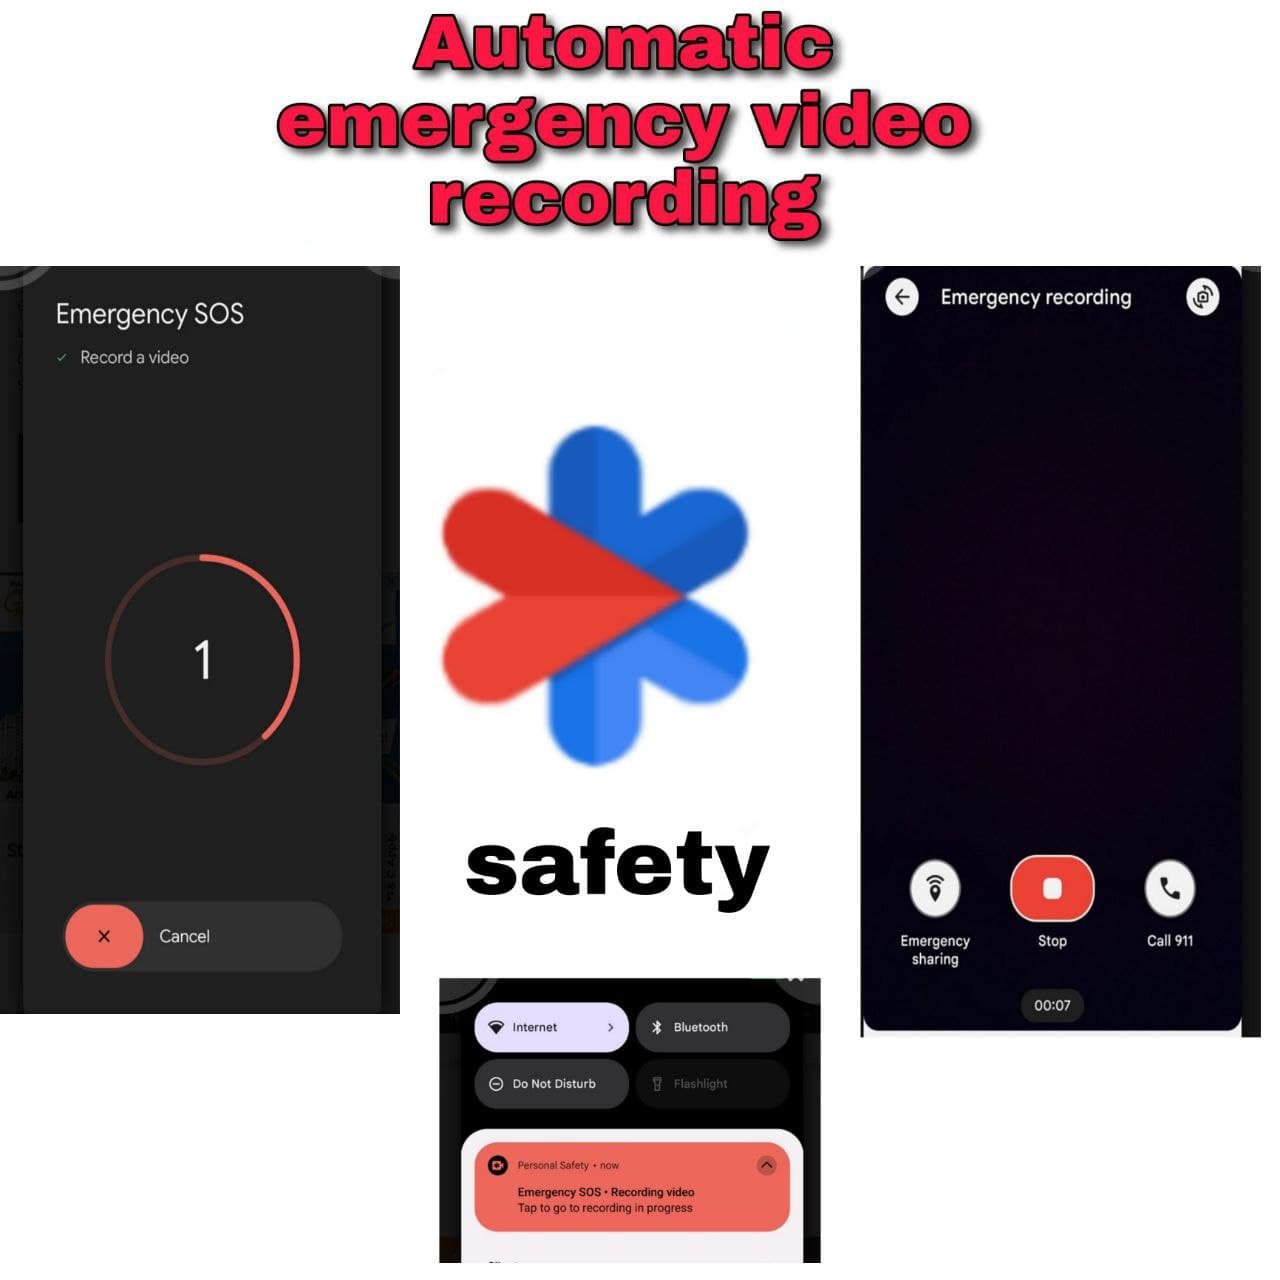 Google pixel safety app can now record video automatically during emergency